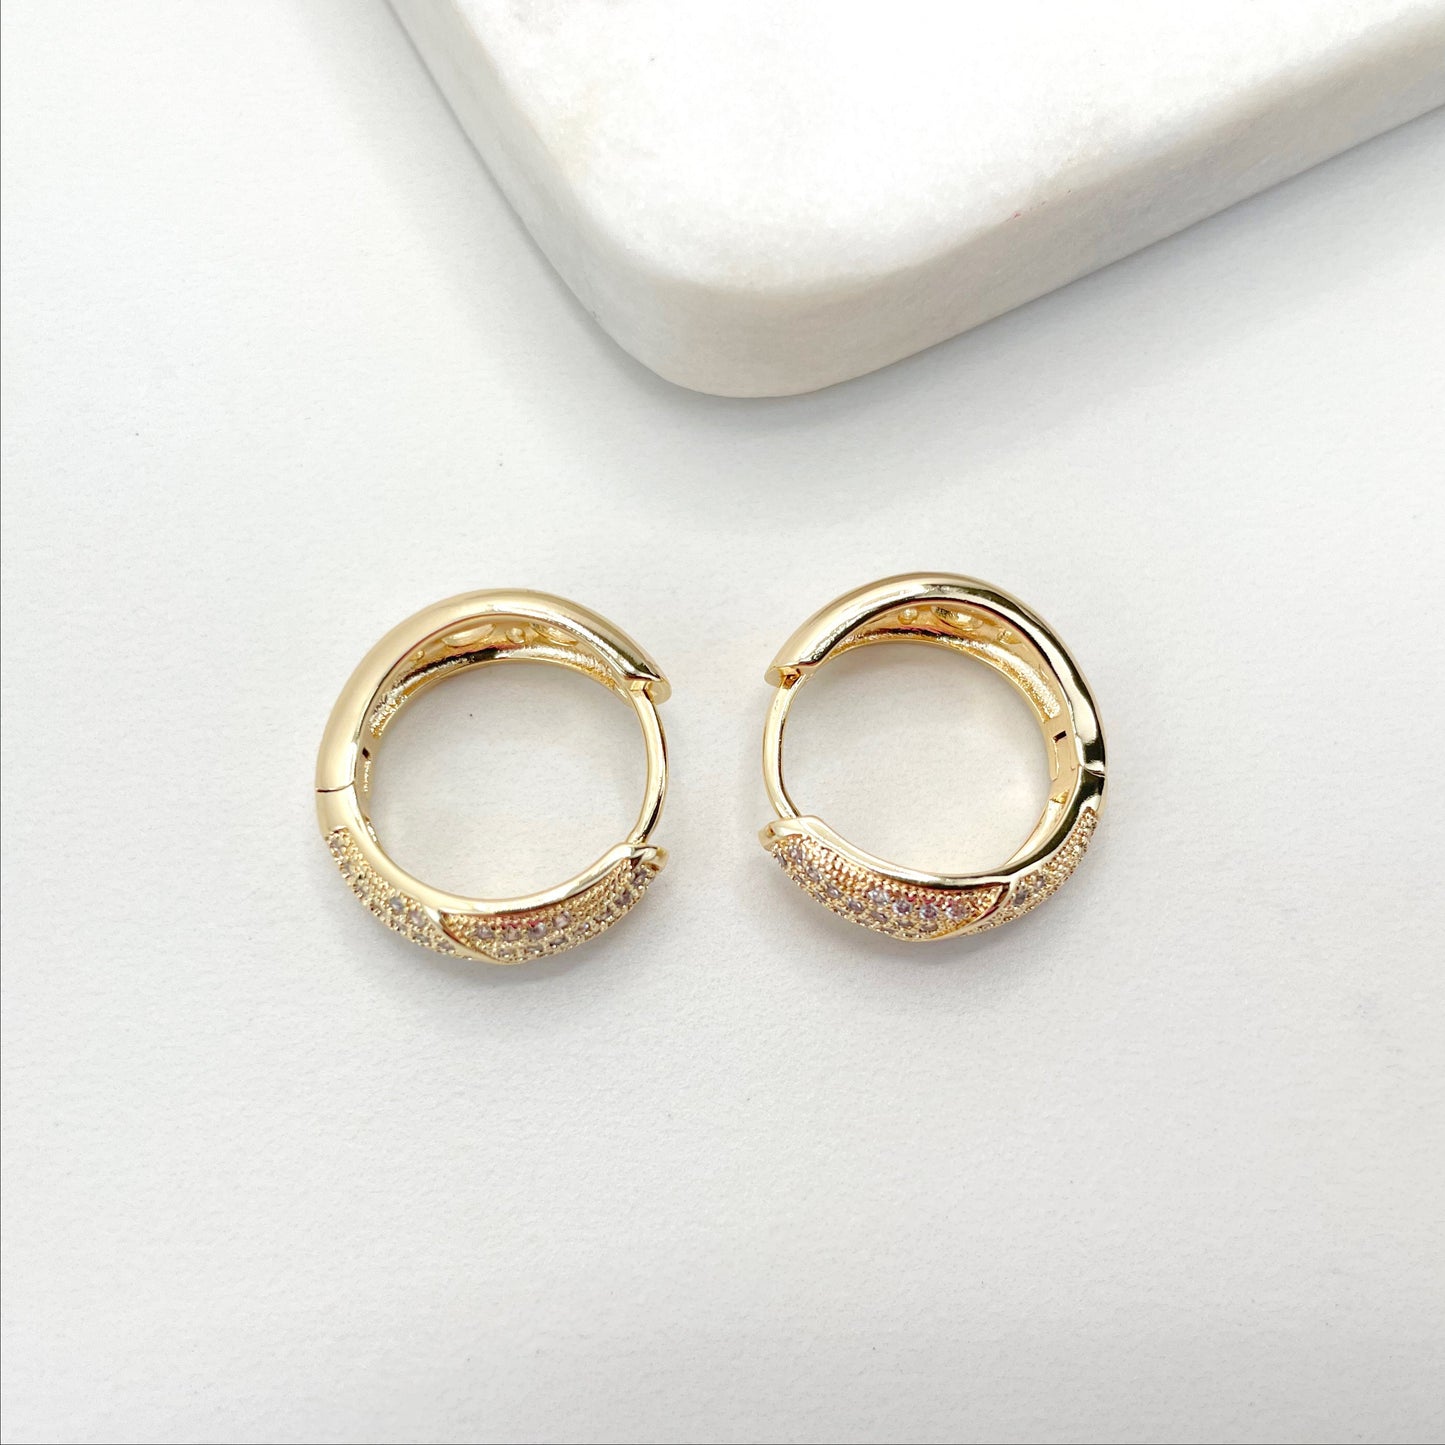 18k Gold Filled with Micro Cubic Zirconia CZ 20mm Hoops Earrings Wholesale Jewelry Making Supplies